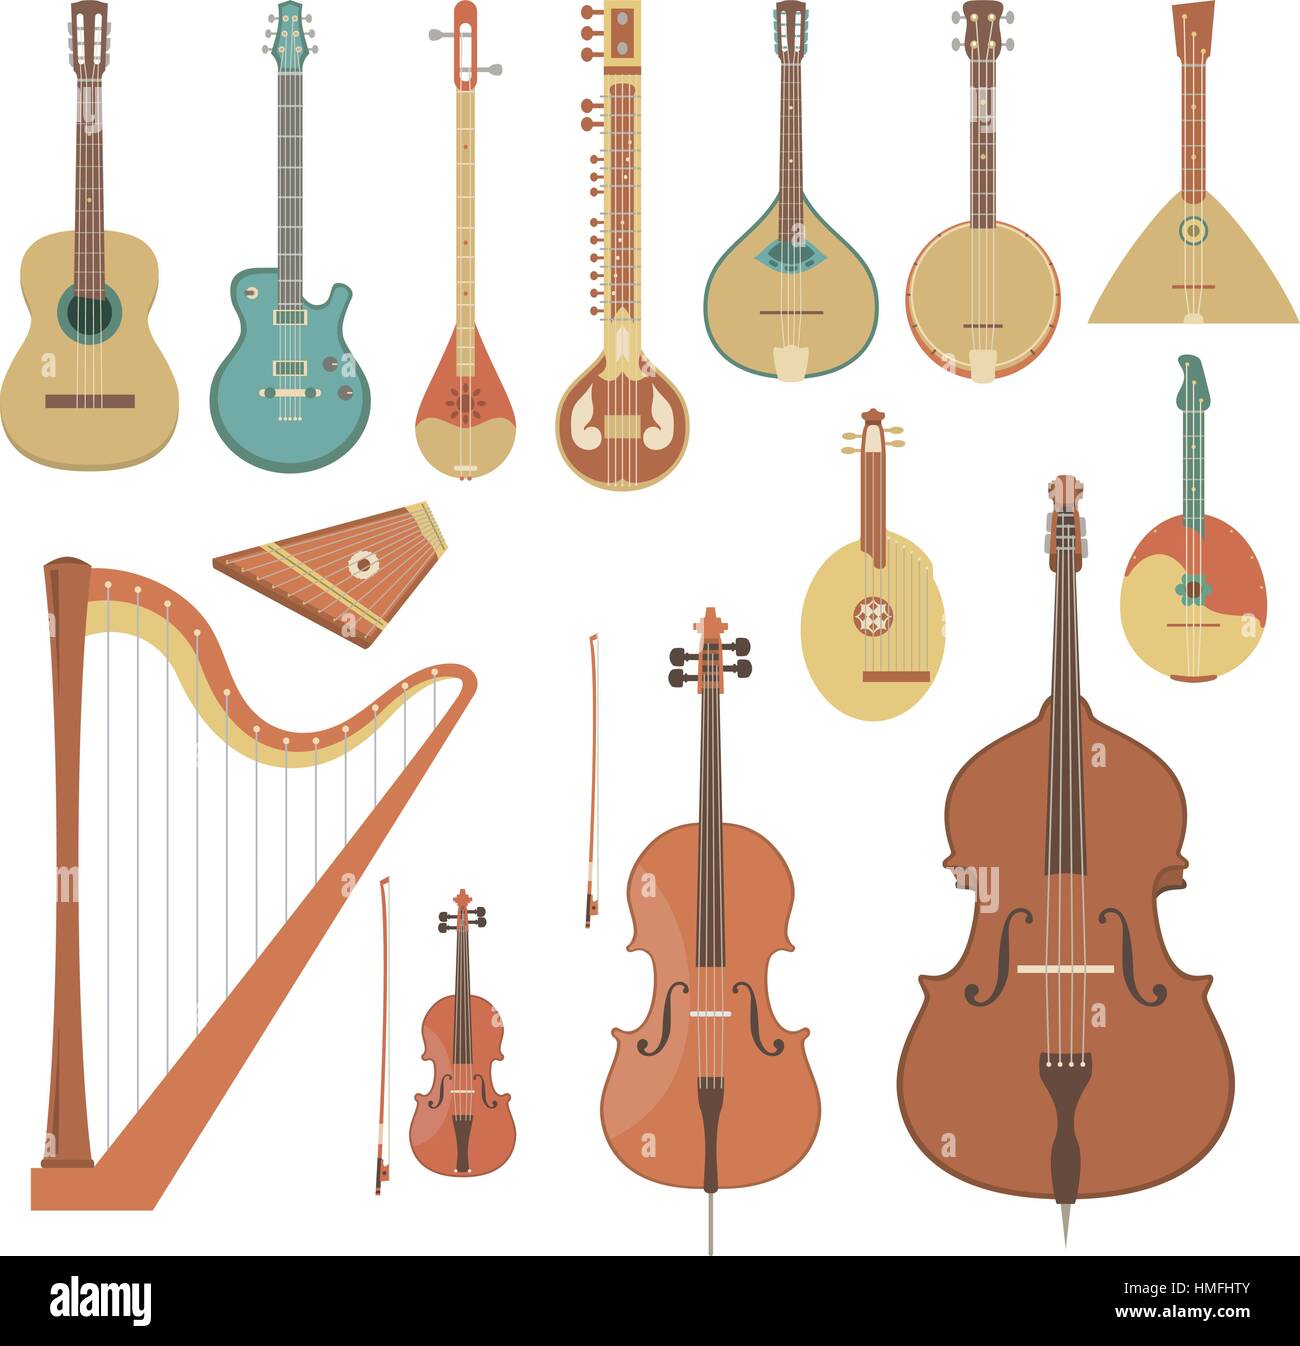 Set of various string musical instruments in the flat style Stock Vector